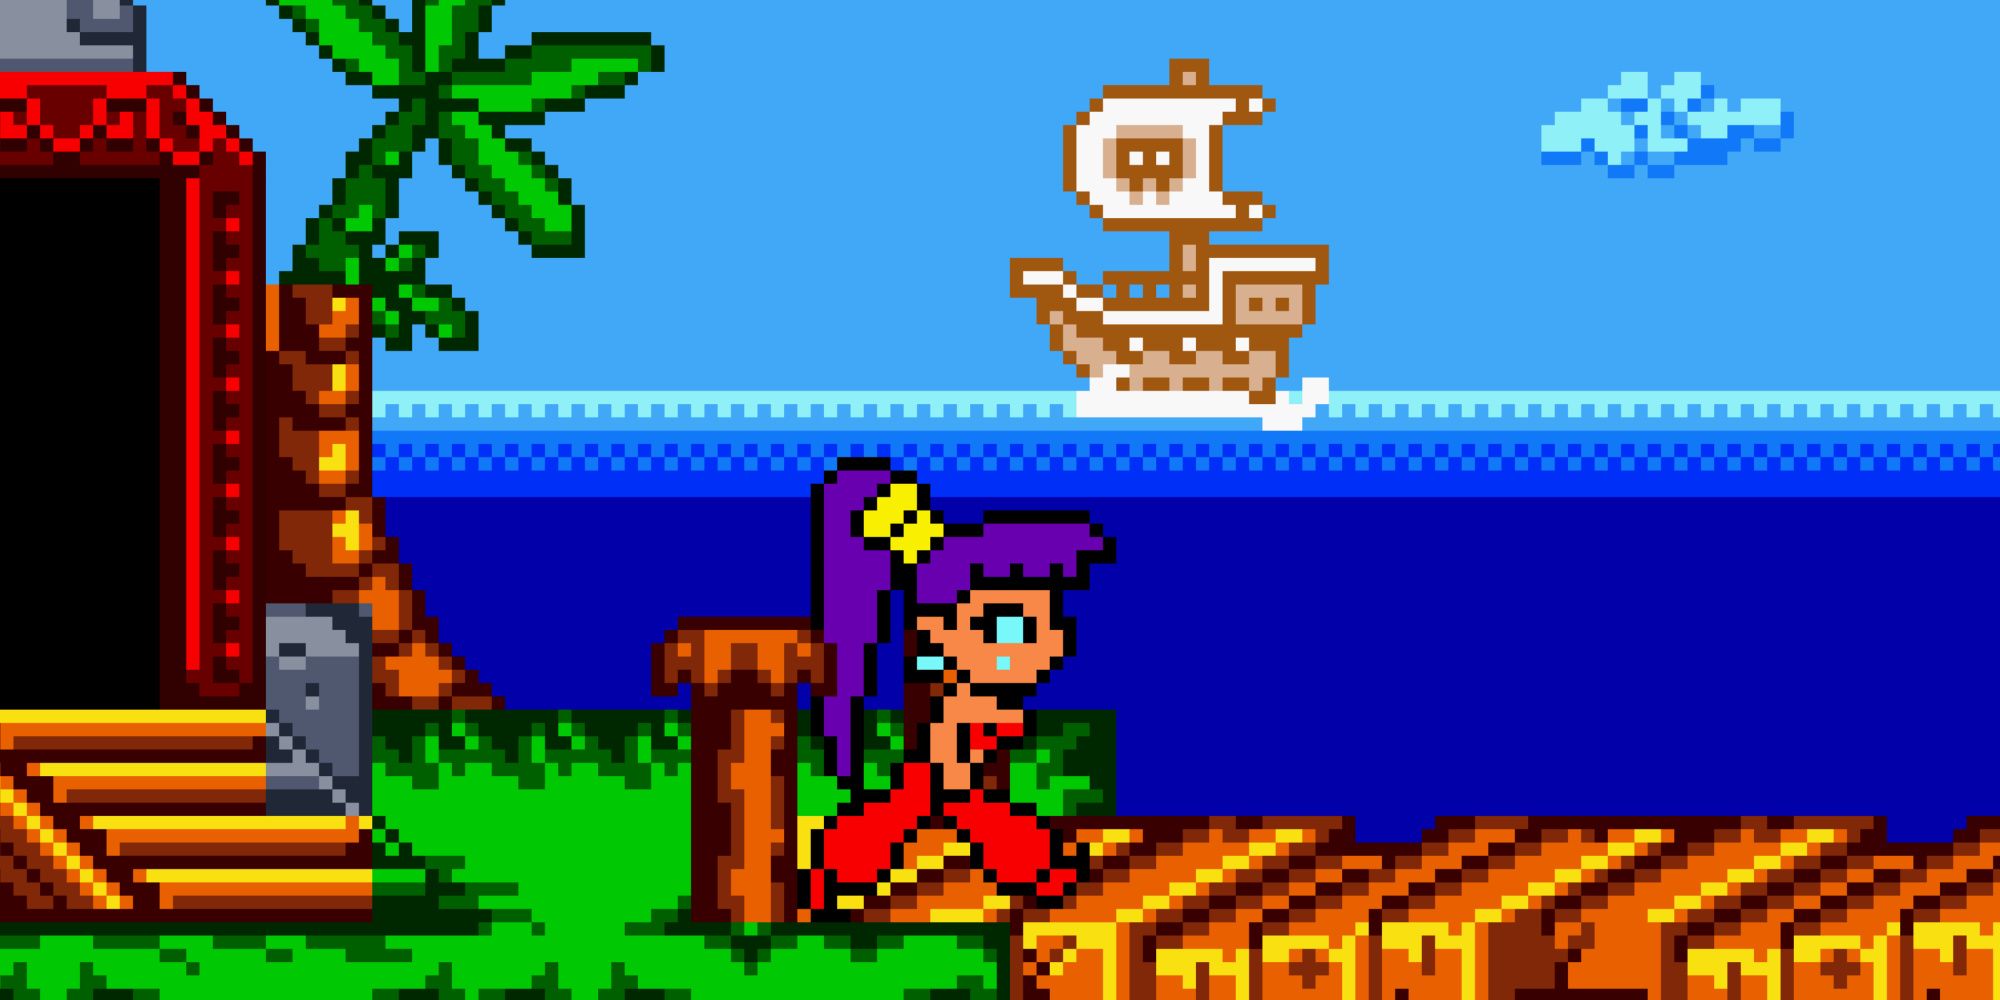 Exploring a level in Shantae